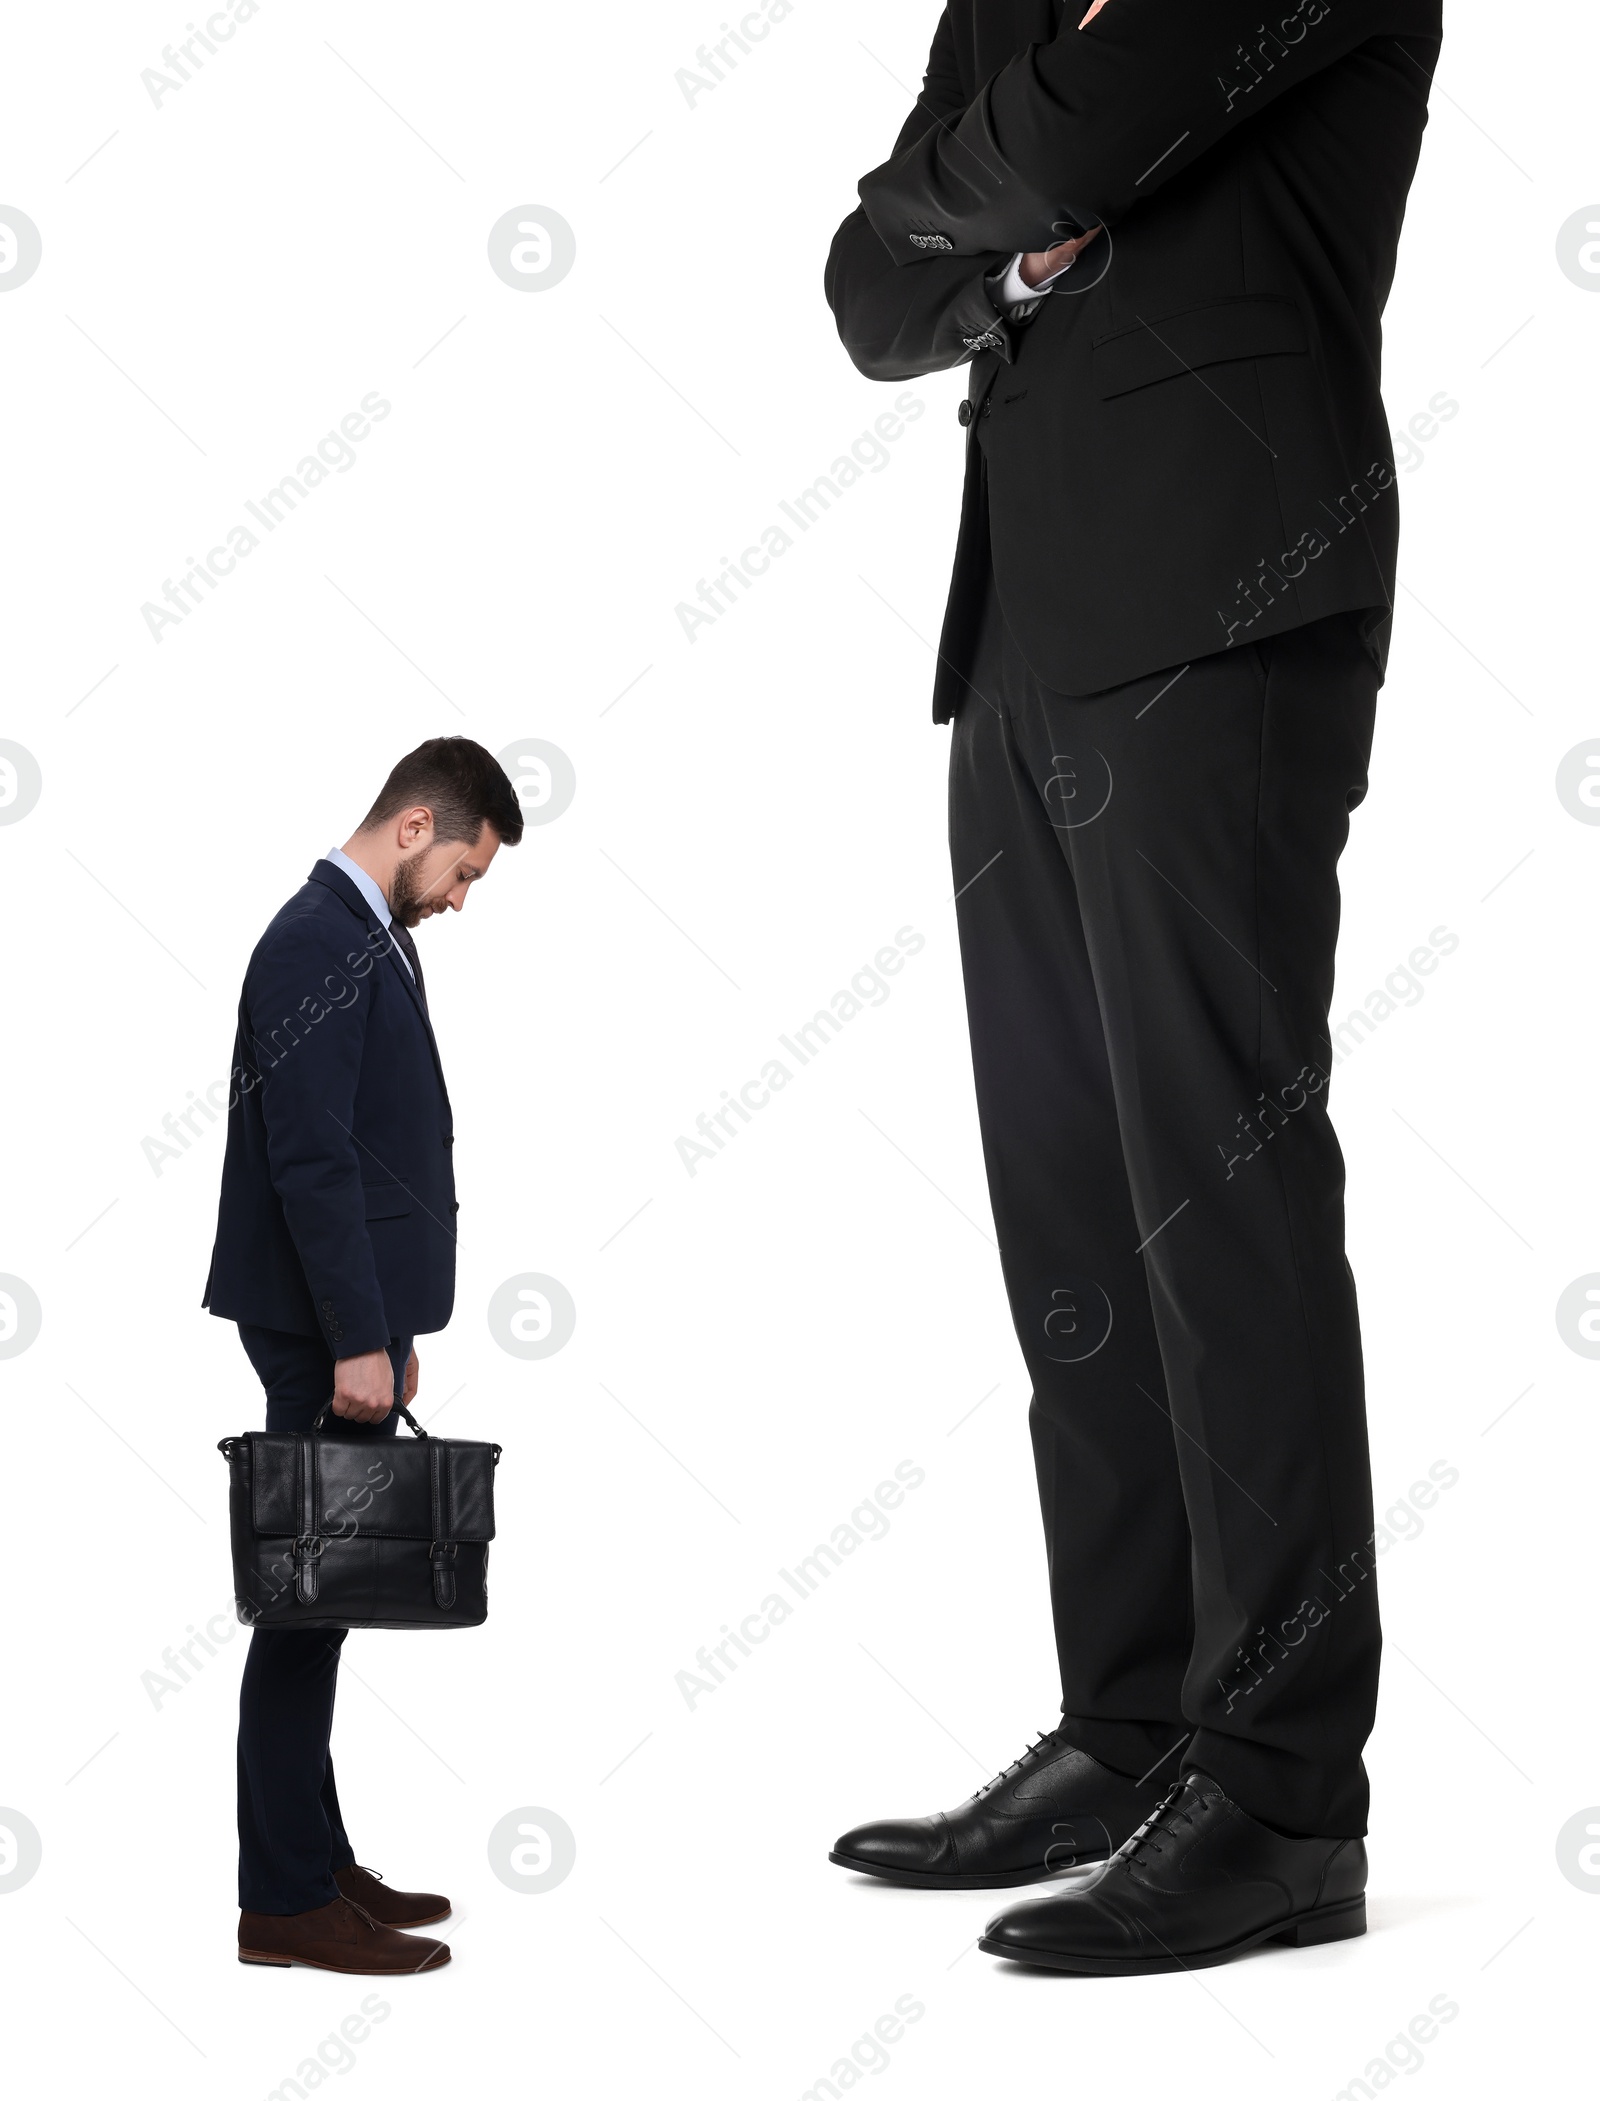 Image of Giant boss and sad small man on white background